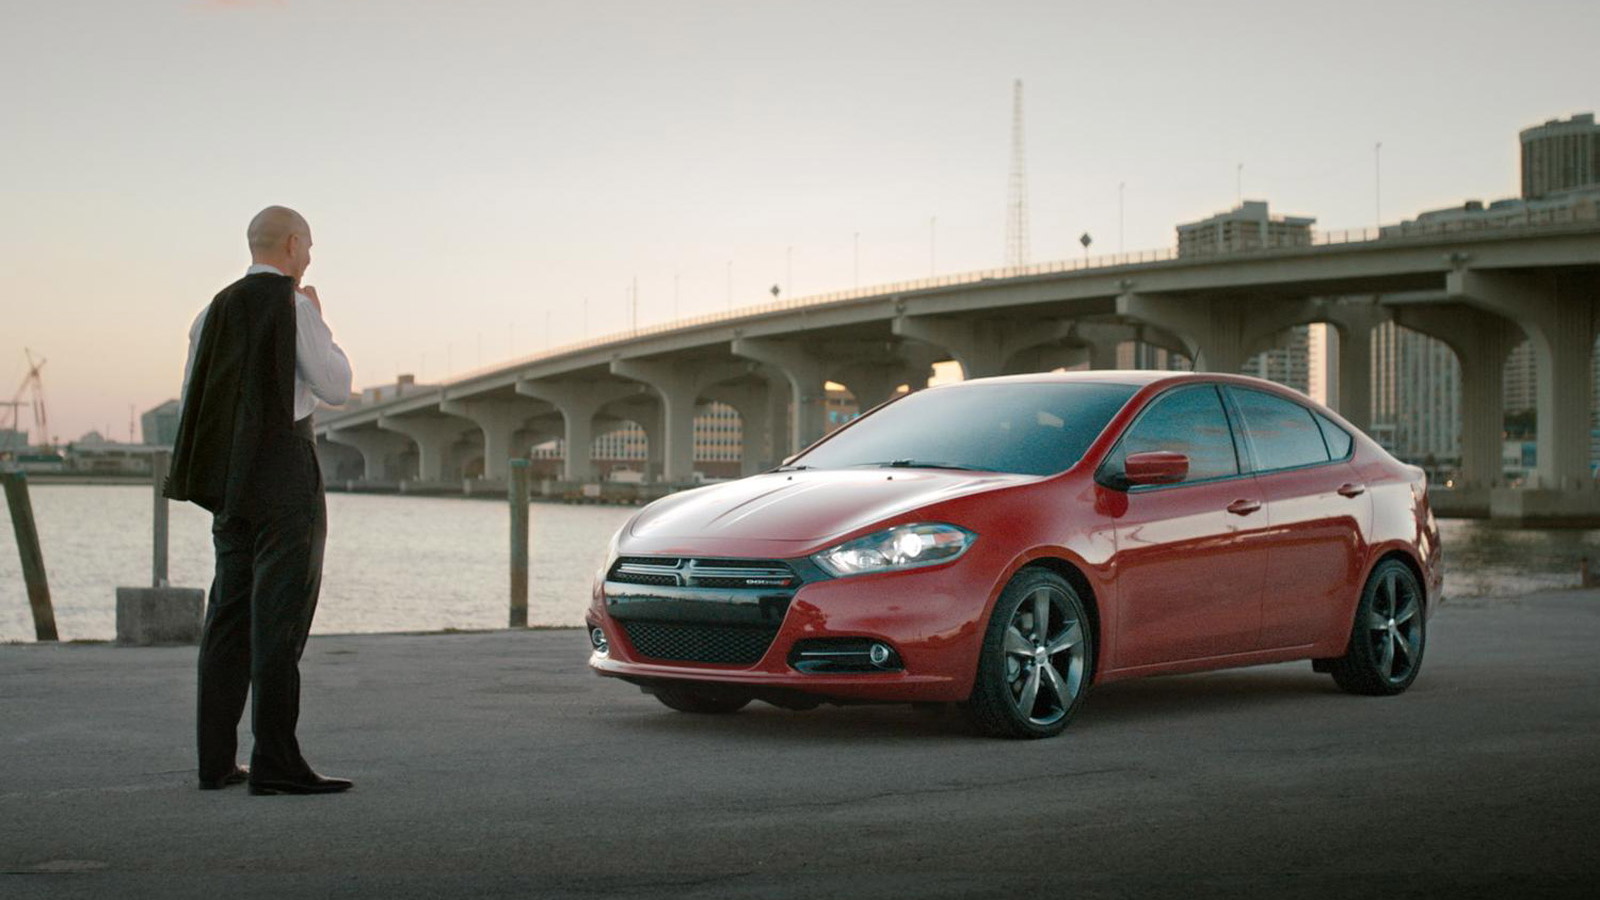 Rapper Pitbull stars in ‘Your Rules’ ad campaign for the 2013 Dodge Dart